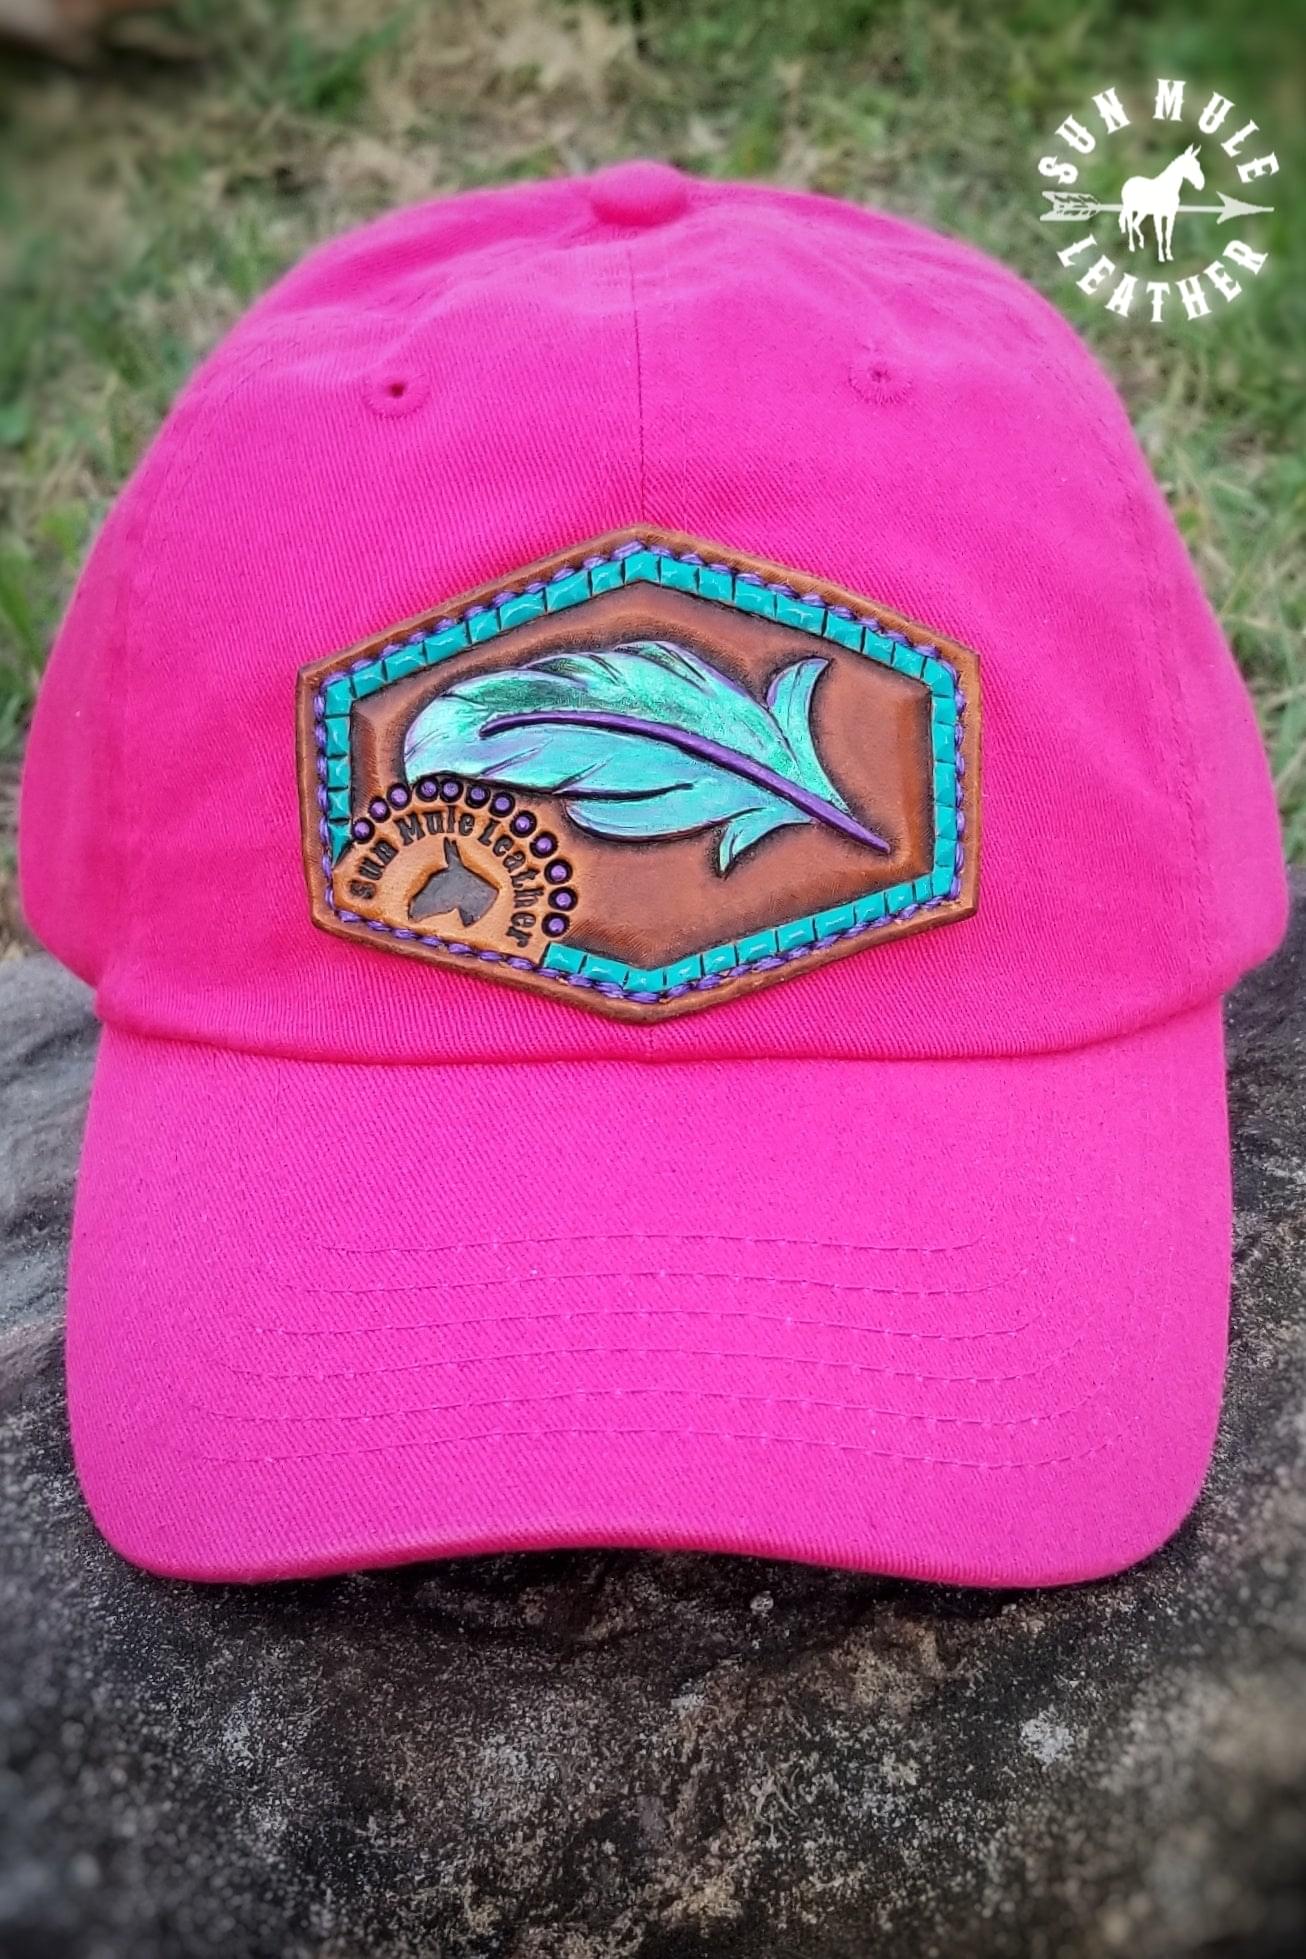 Hand tooled leather hat patch with purple/mermaid colored paint. 